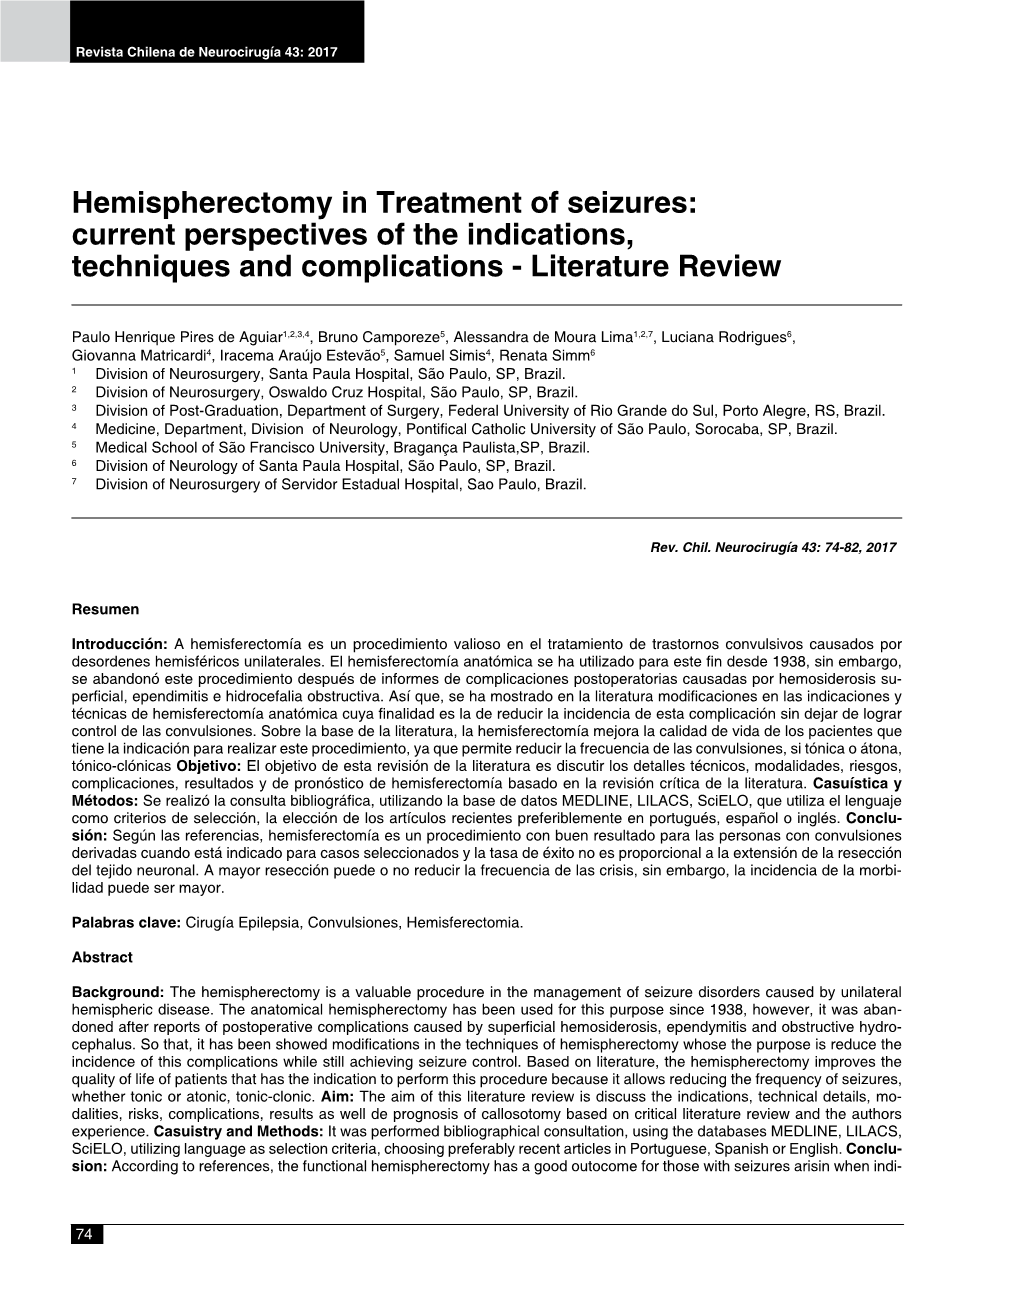 Hemispherectomy in Treatment of Seizures: Current Perspectives of the Indications, Techniques and Complications - Literature Review